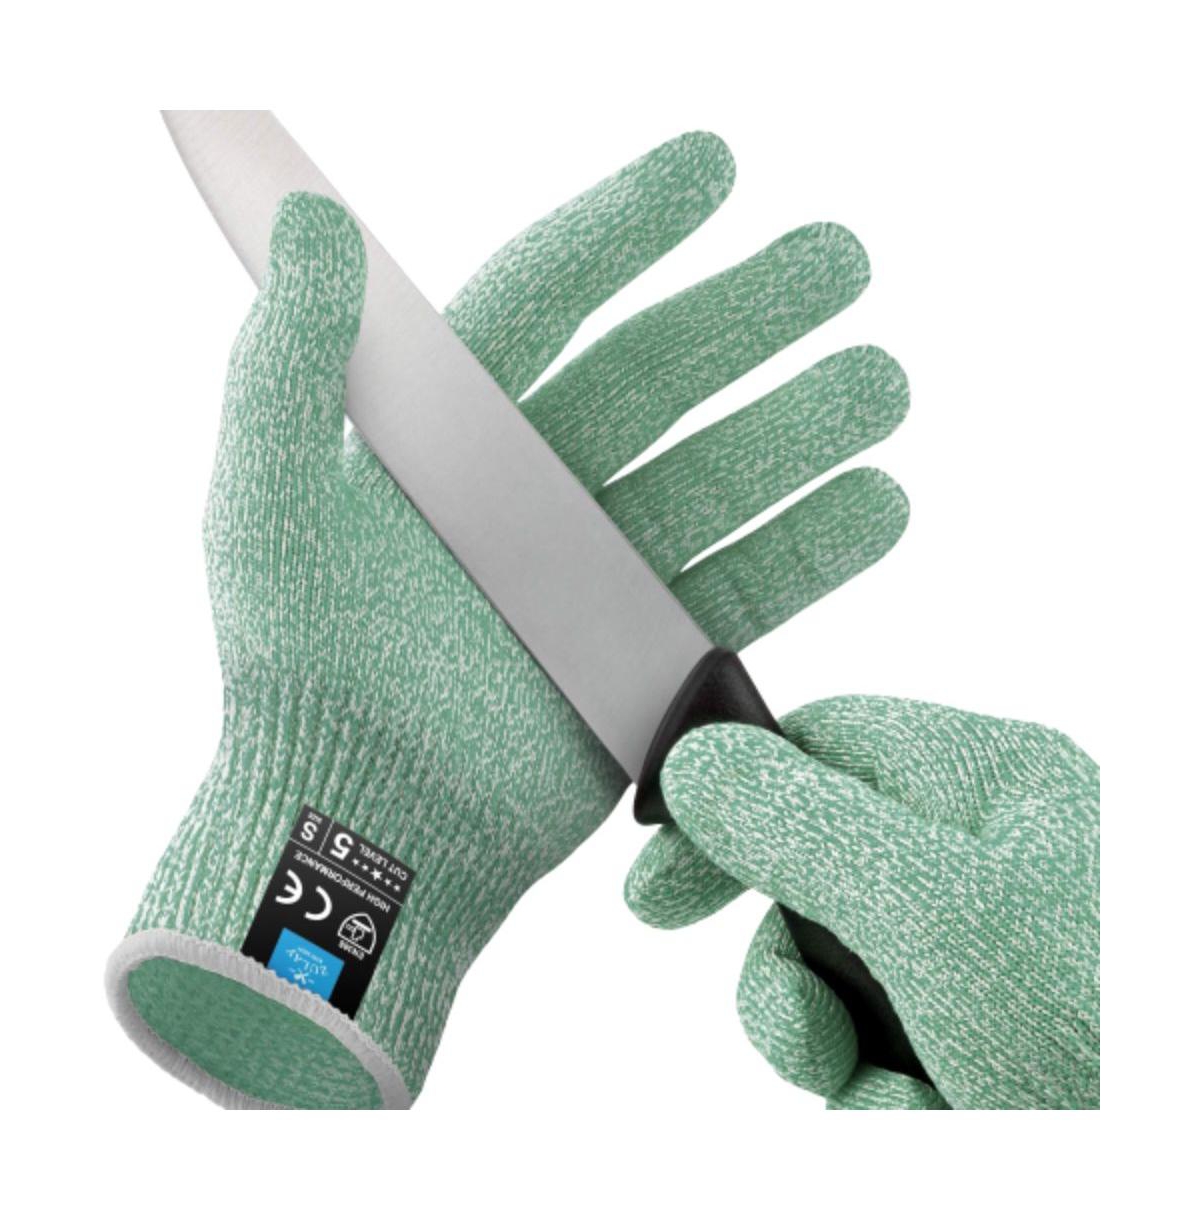 Zulay Kitchen Cut Resistant Gloves Food Grade Level 5 Protection In Green